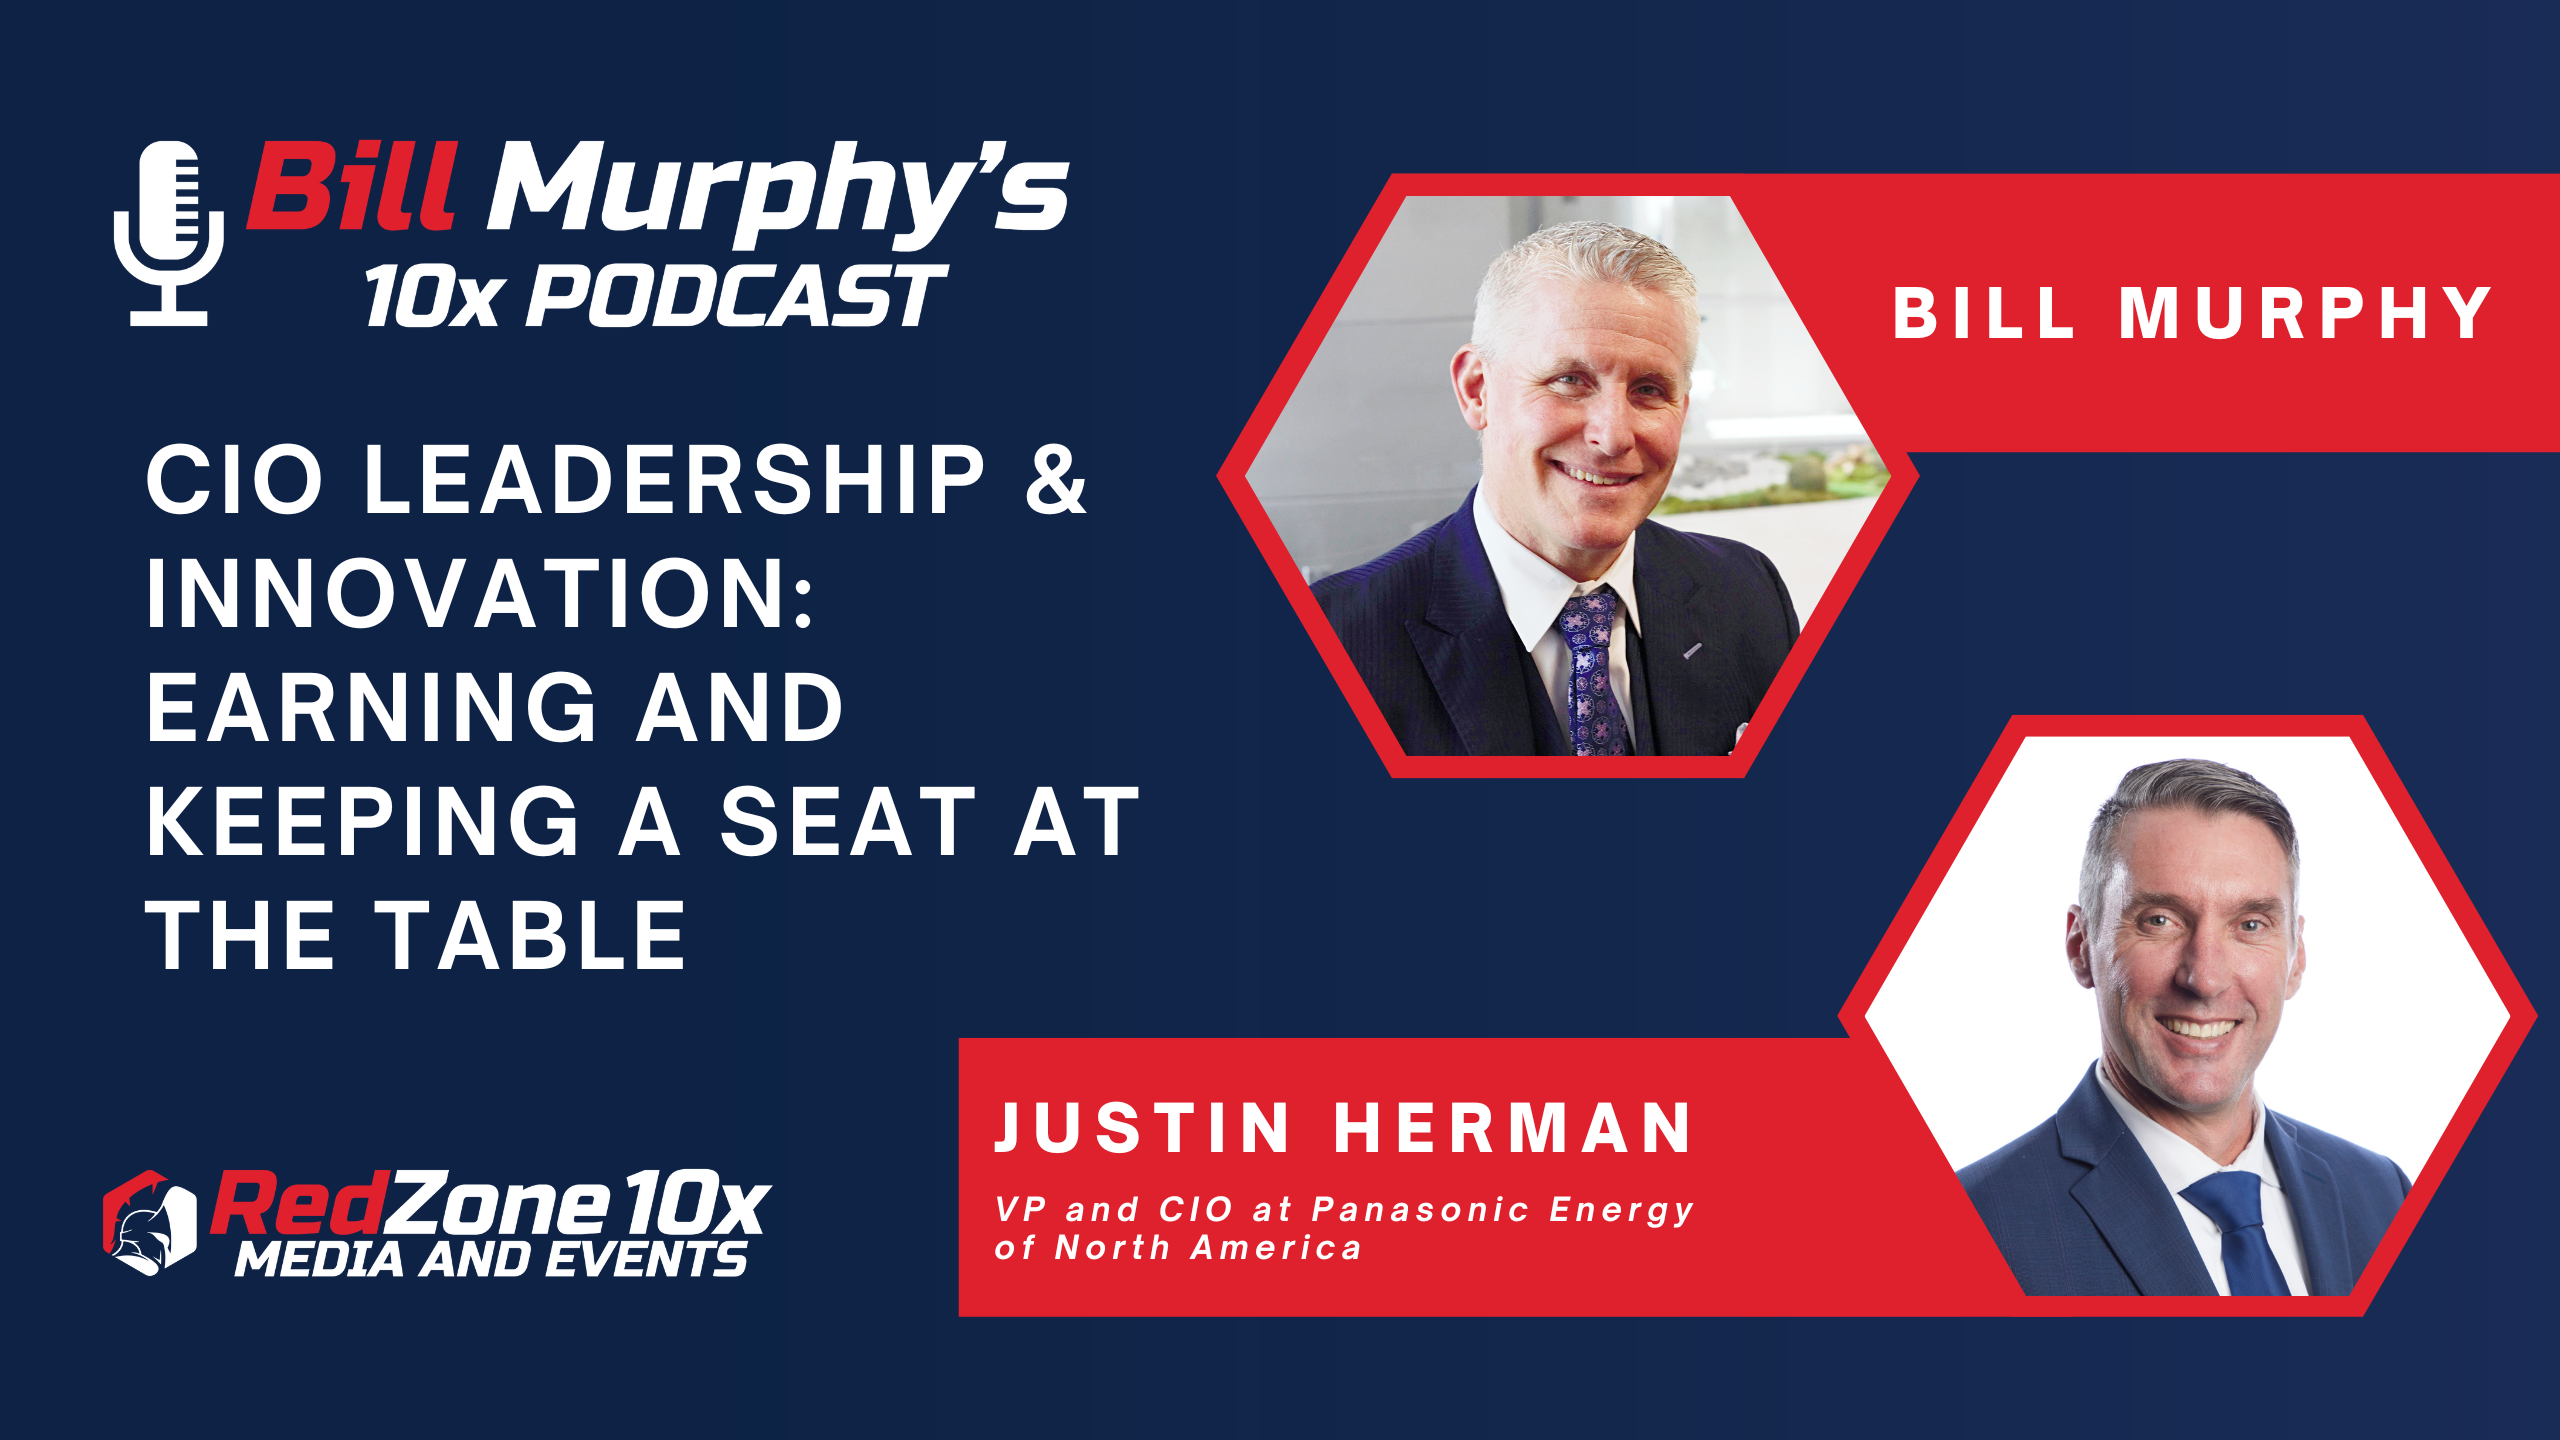 CIO Leadership & Innovation: Earning and Keeping a Seat at the Table - with Justin Herman, VP & CIO at Panasonic Energy of North America